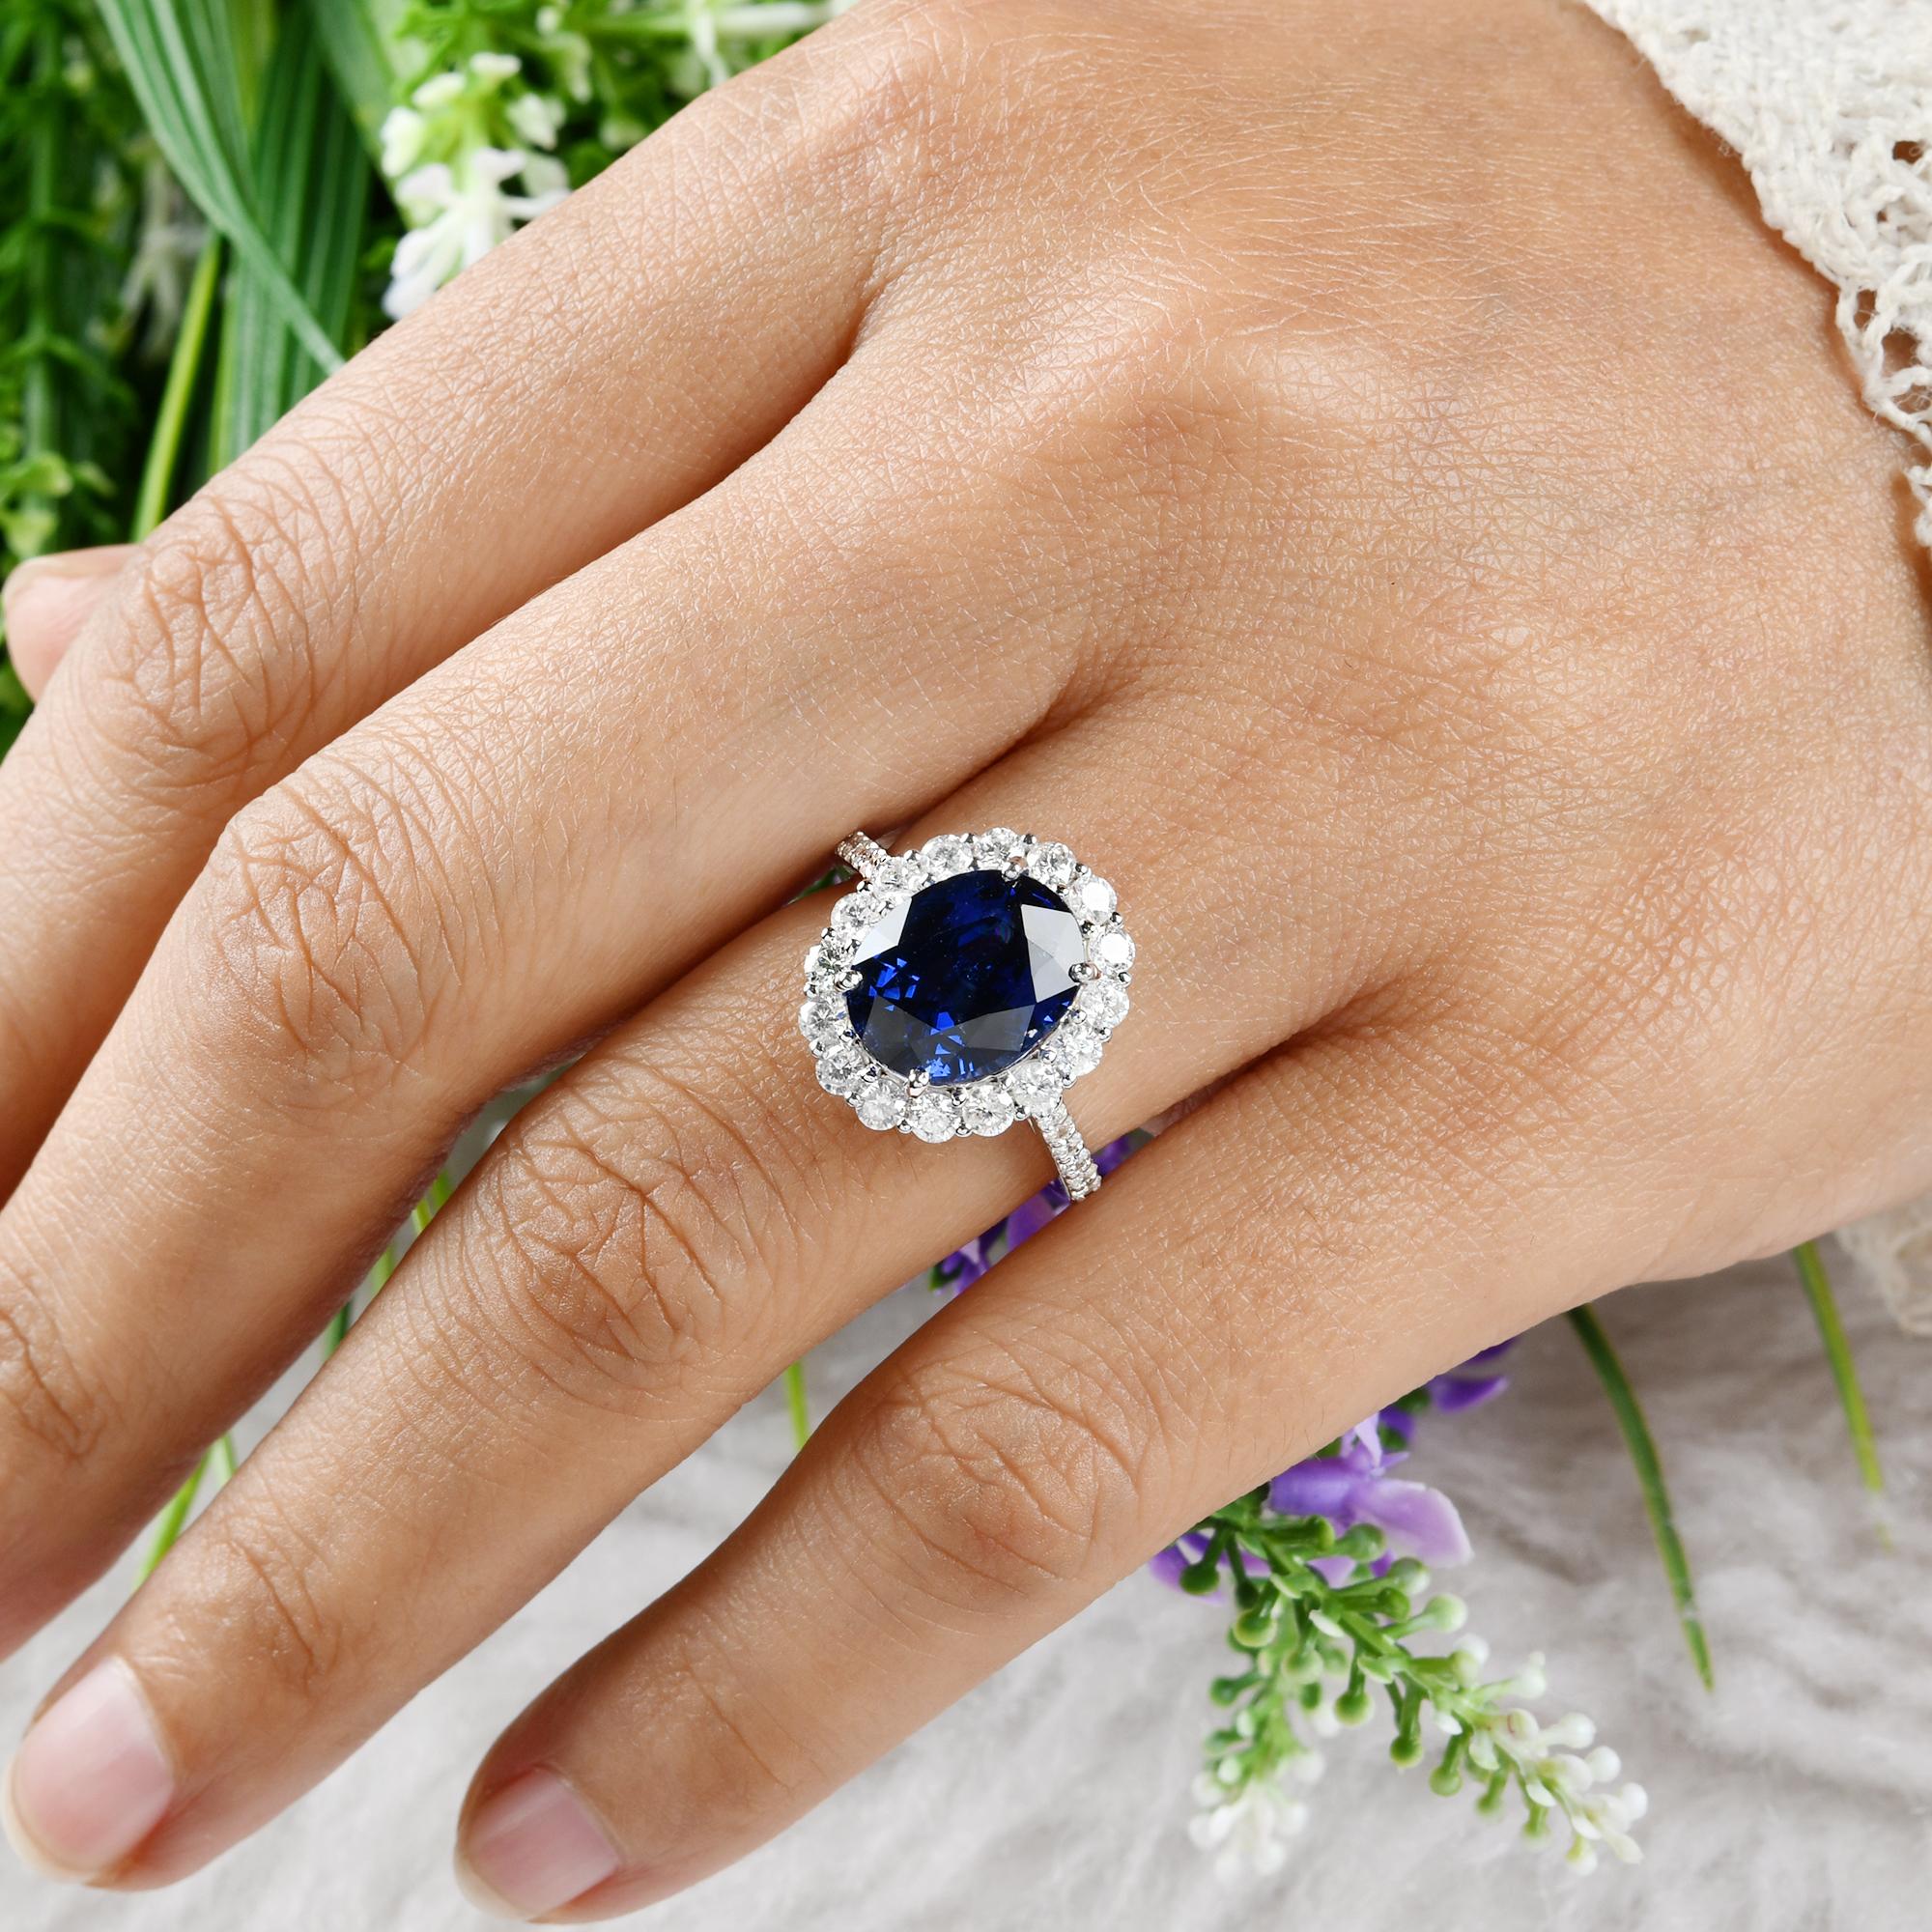 For Sale:  Oval Blue Sapphire Gemstone Ring SI Clarity HI Color Diamond 18 Karat White Gold 4